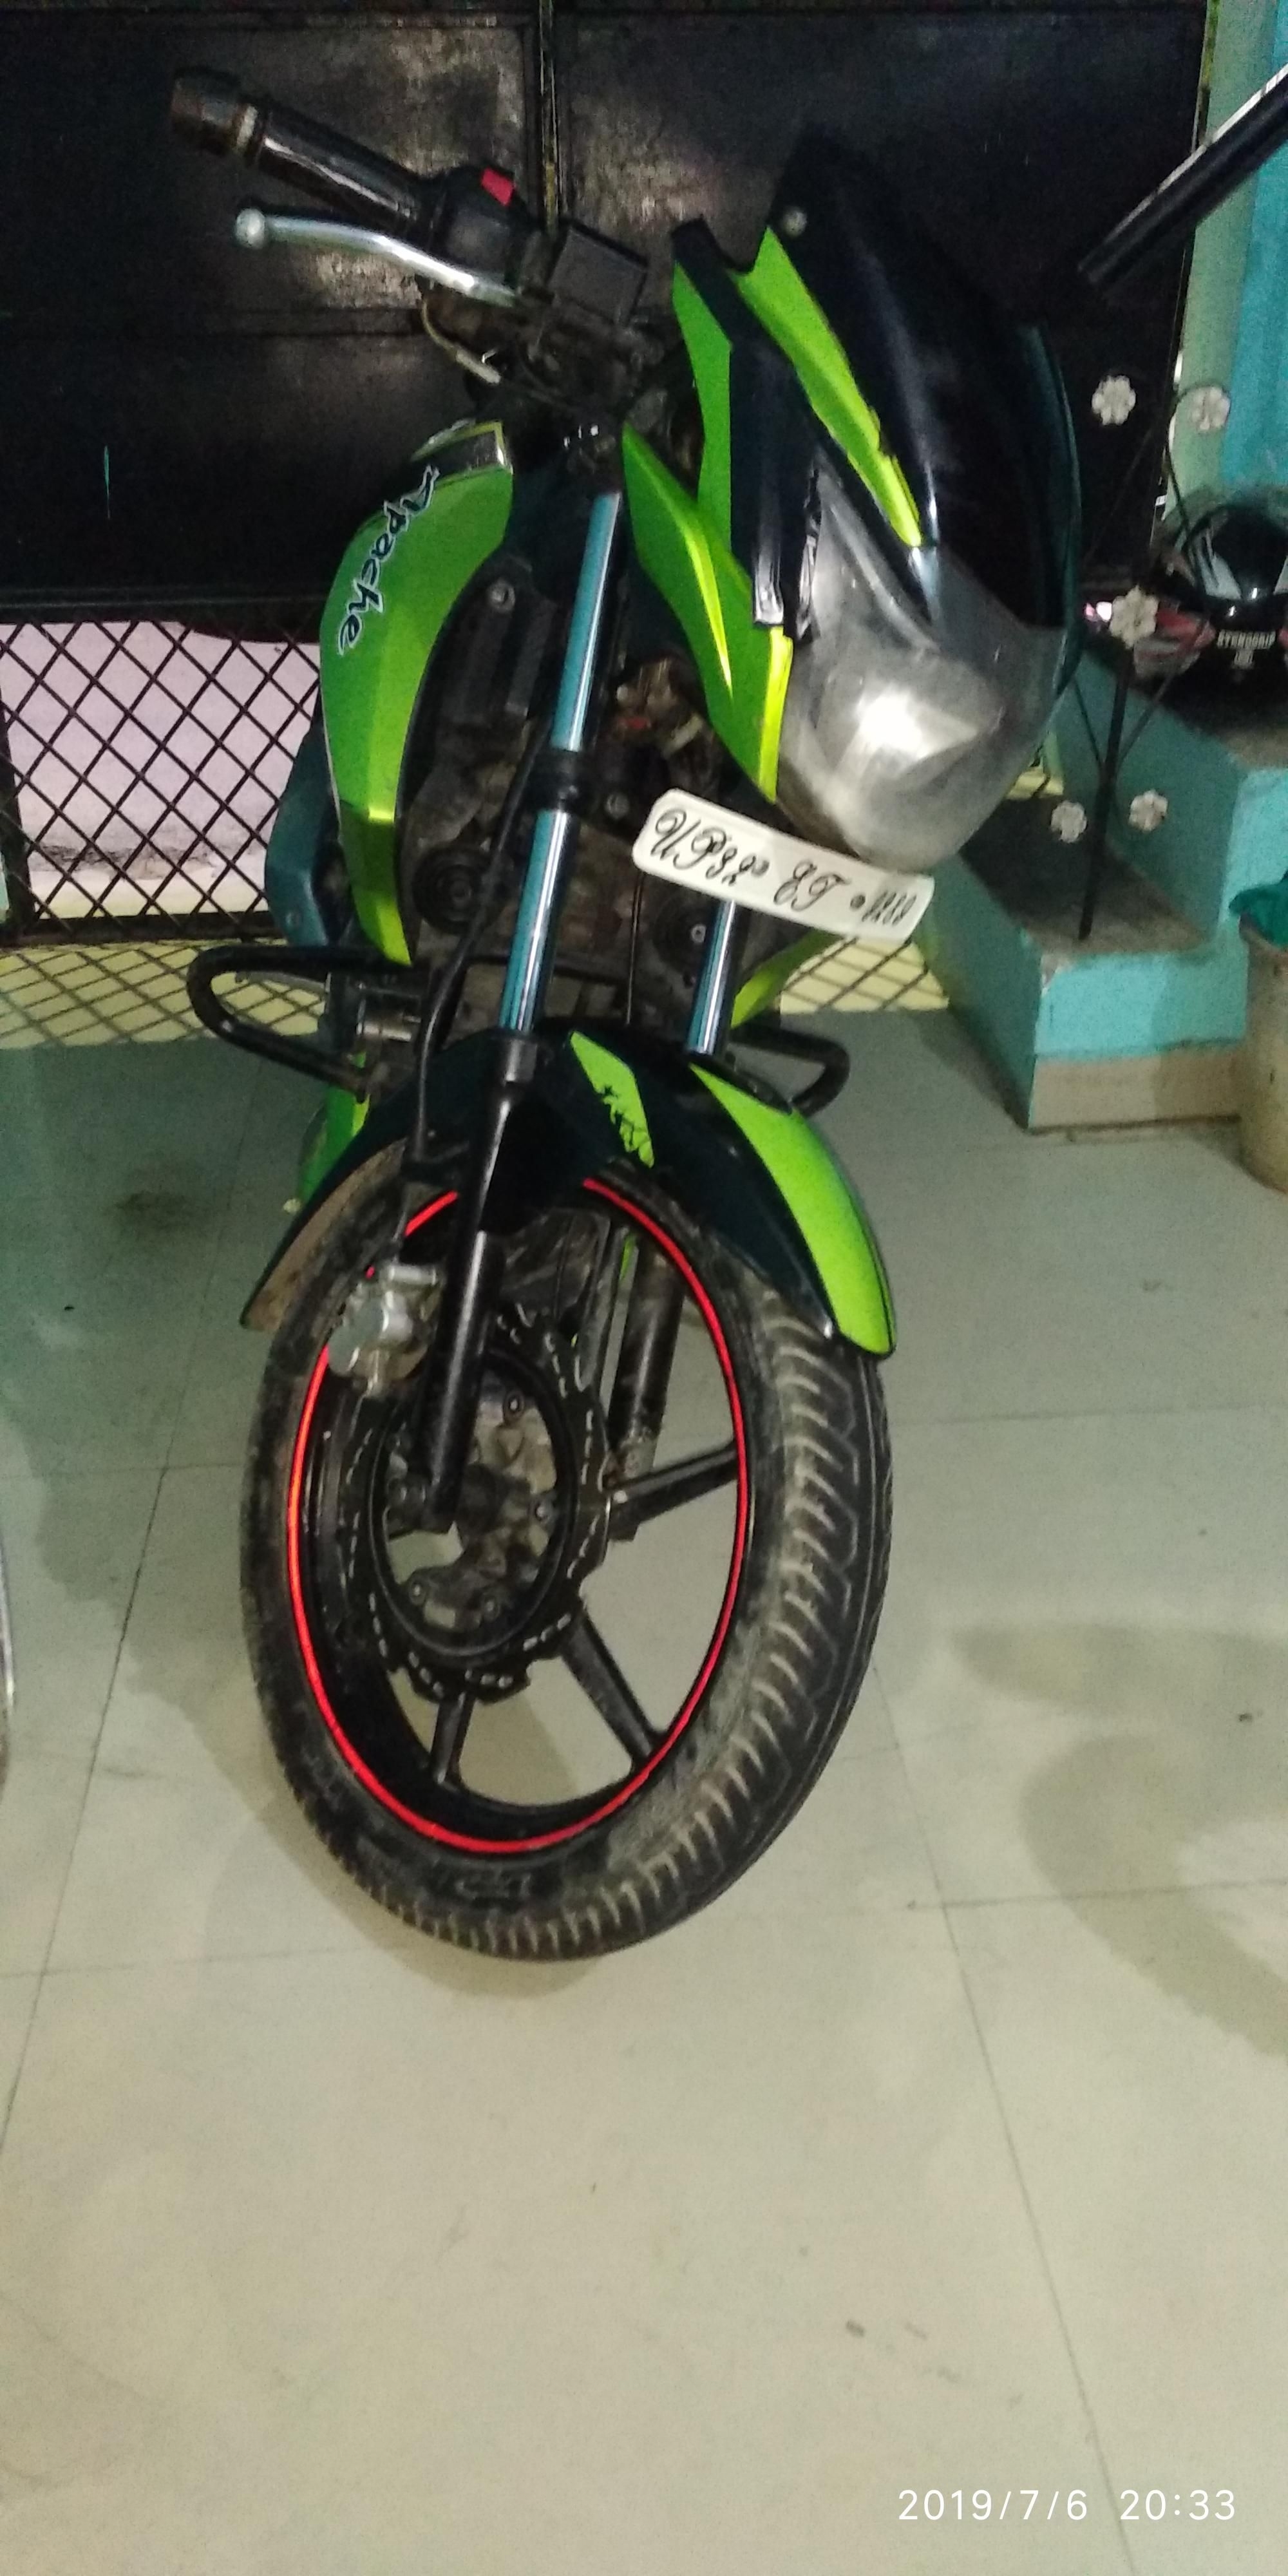 Tvs Apache Rtr Bike For Sale In Lucknow Id Droom